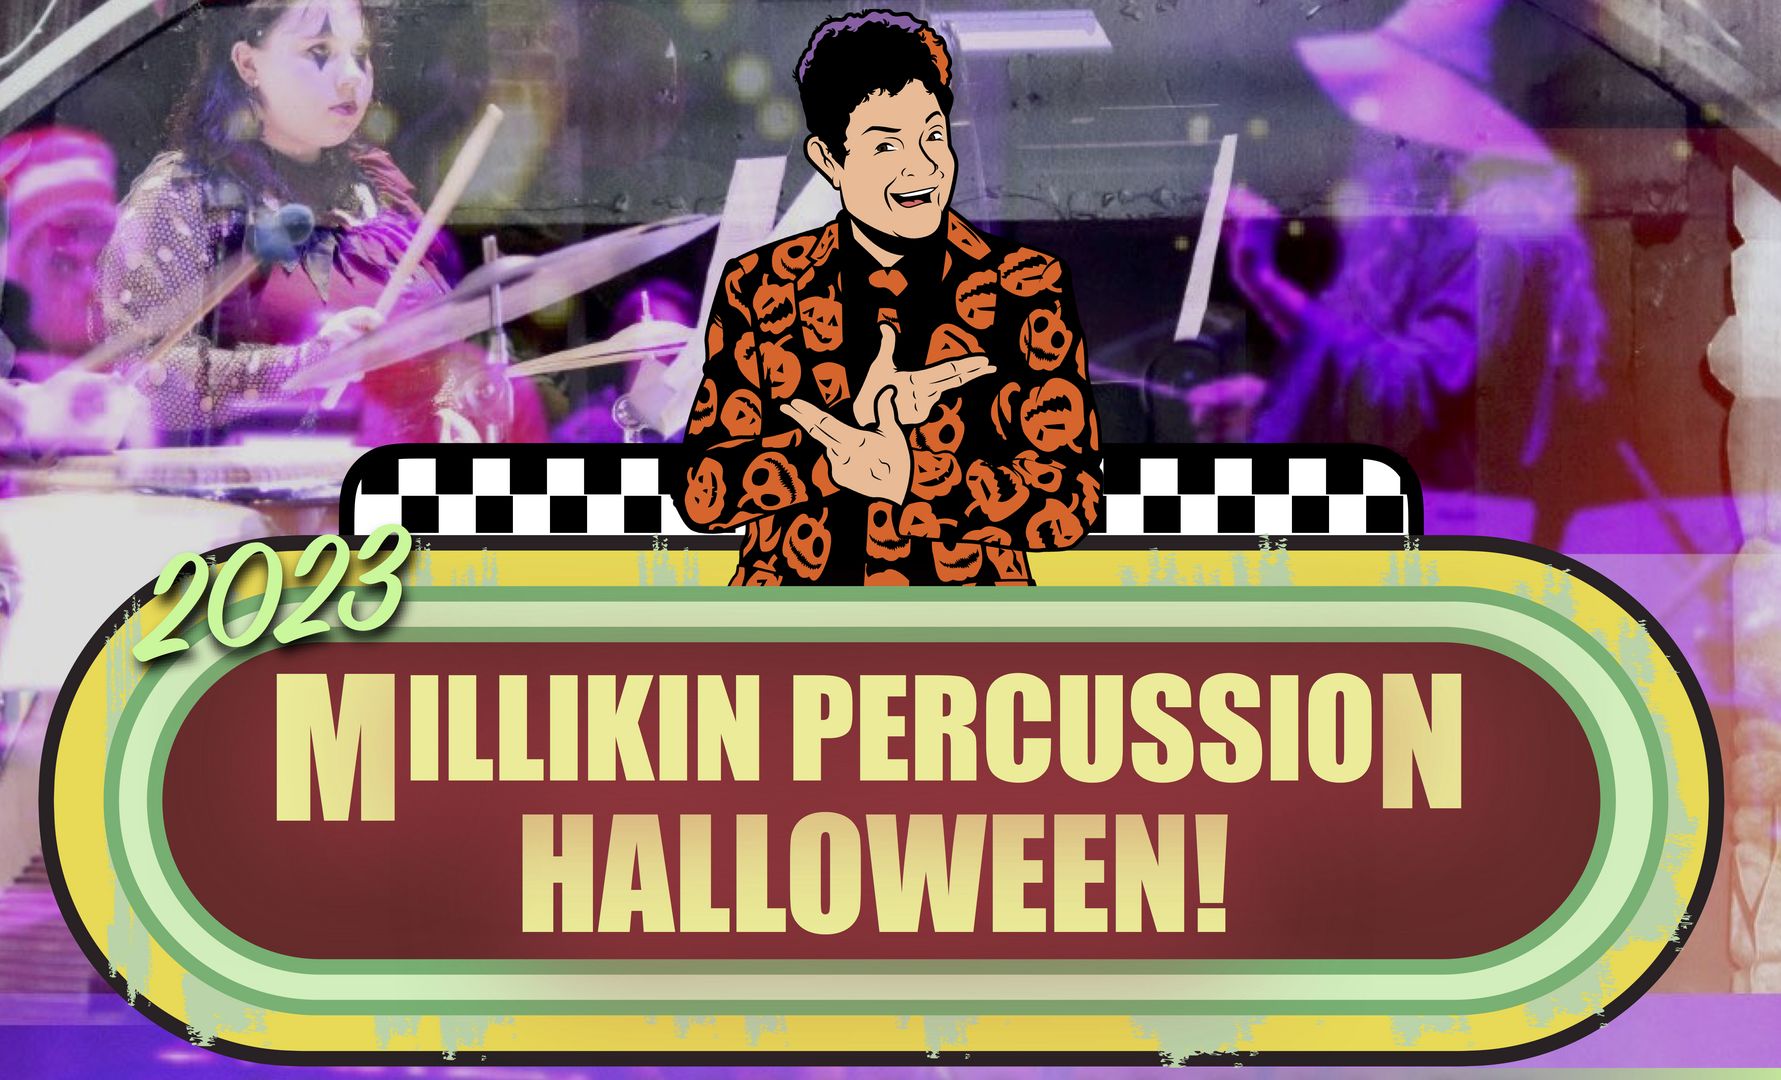 Halloween Percussion Concert, presented by the Millikin School of Music, Decatur, Illinois, United States